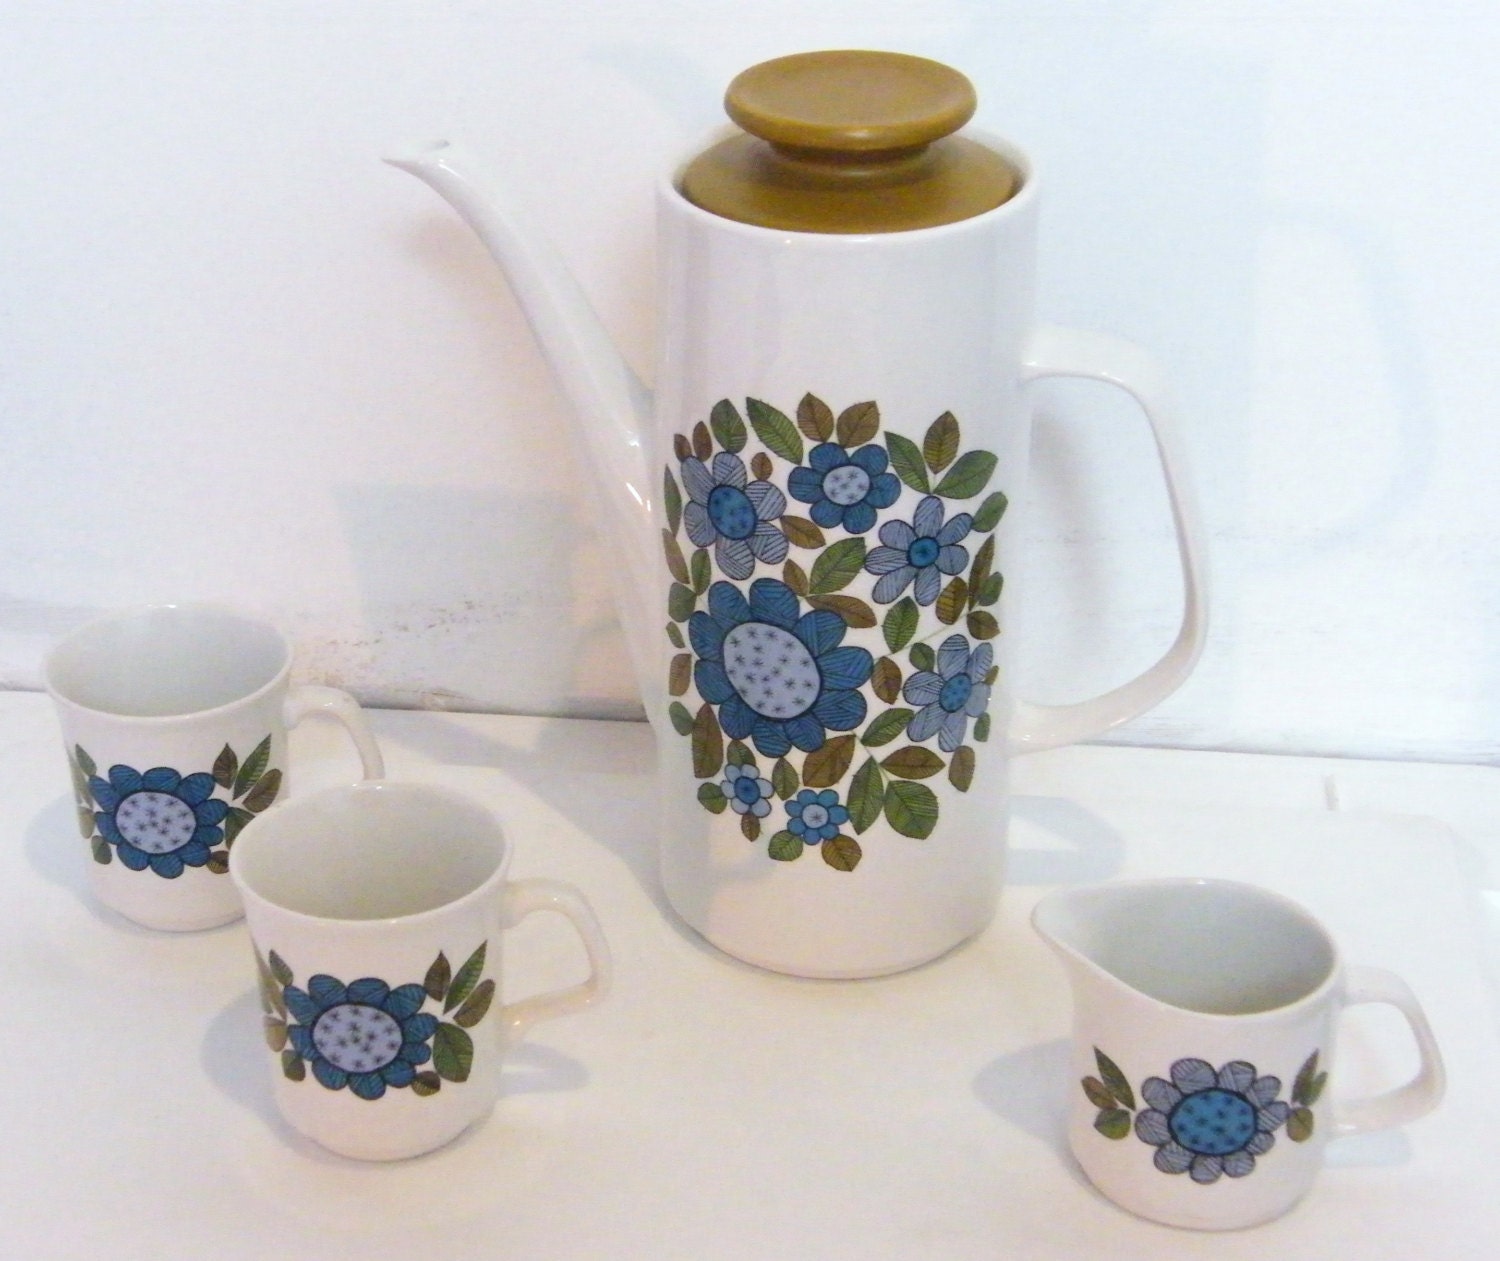 J & G Meakin Coffee pot, cups and creamer jug in TOPIC style